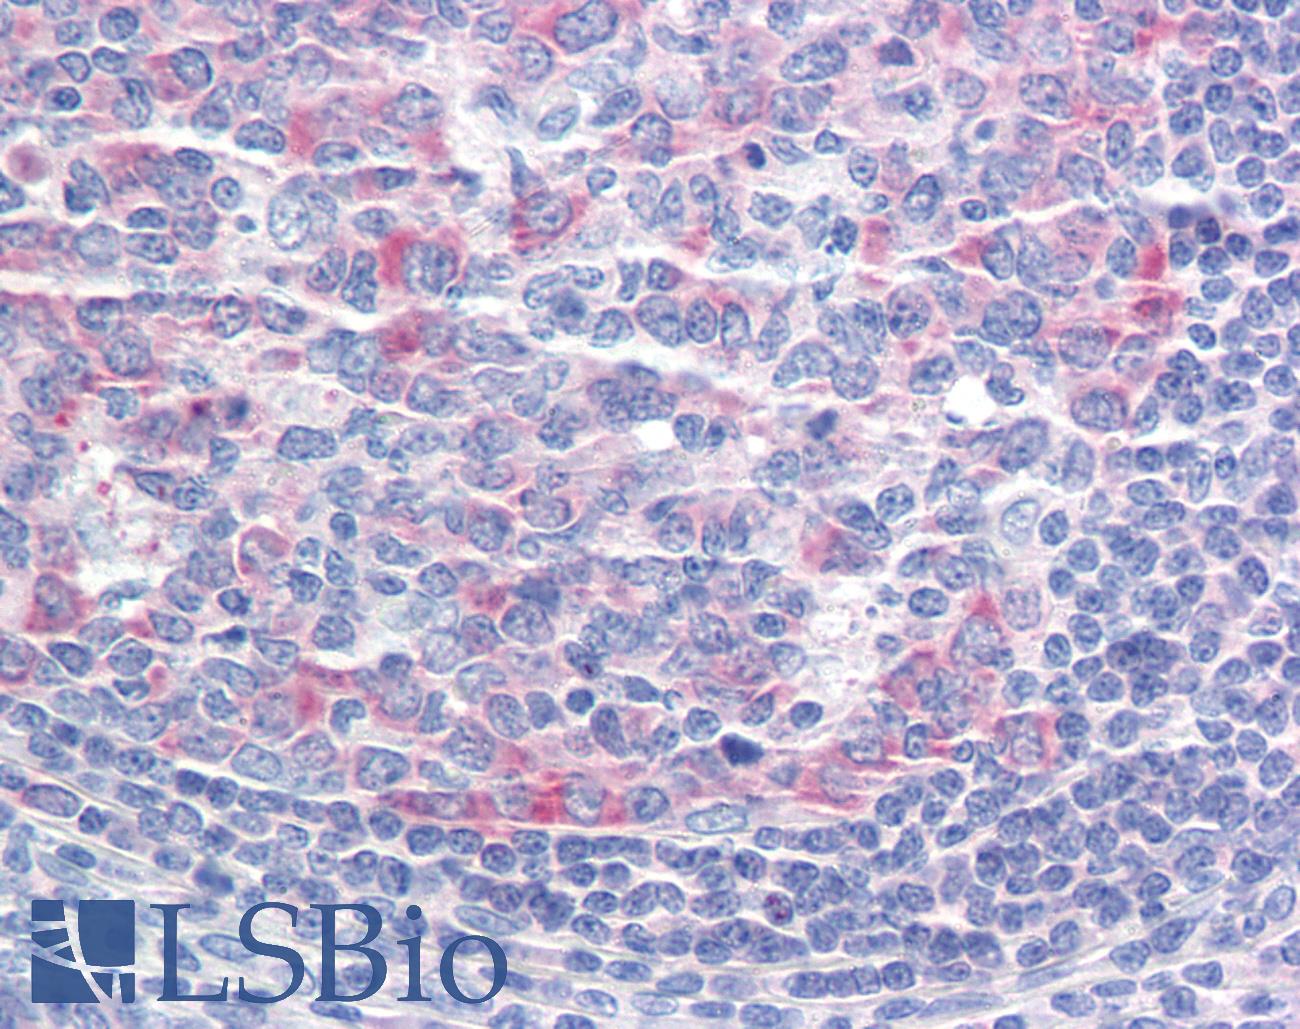 CCT3 Antibody - Anti-CCT3 antibody IHC staining of human tonsil. Immunohistochemistry of formalin-fixed, paraffin-embedded tissue after heat-induced antigen retrieval.